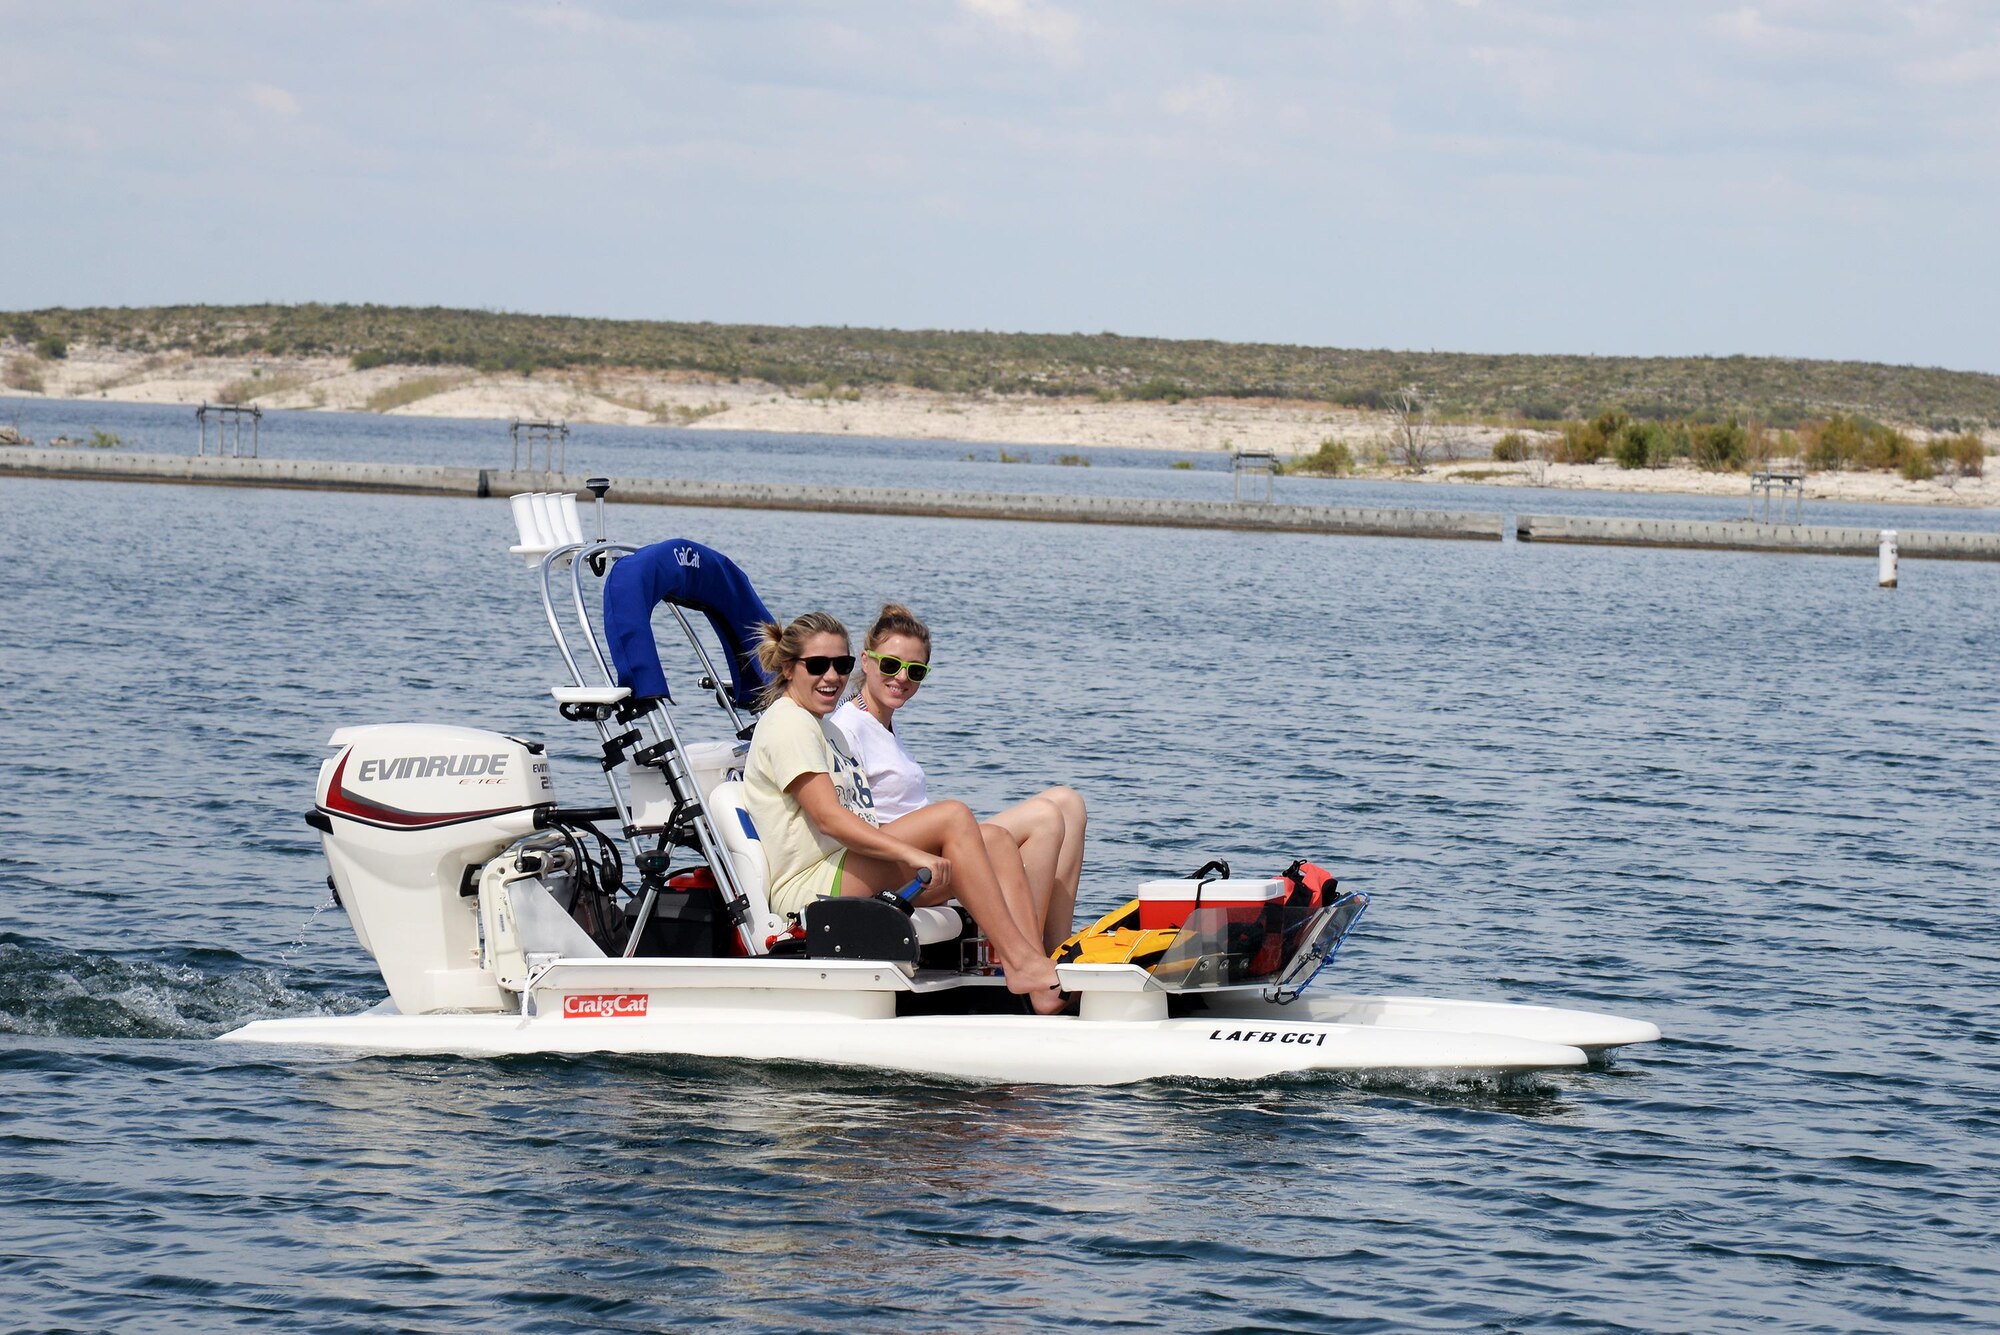 Cydney Gray, front, and Liz Rogers test one of the new catamaran style watercrafts at Southwinds Marina on Oct. 16, 2015. This watercraft can reach speeds of up to 25 mph and can be rented for $20 an hour or $100 for a day (prices include gasoline). (U.S. Air Force photo by Airman 1st Class Brandon May)(Released)